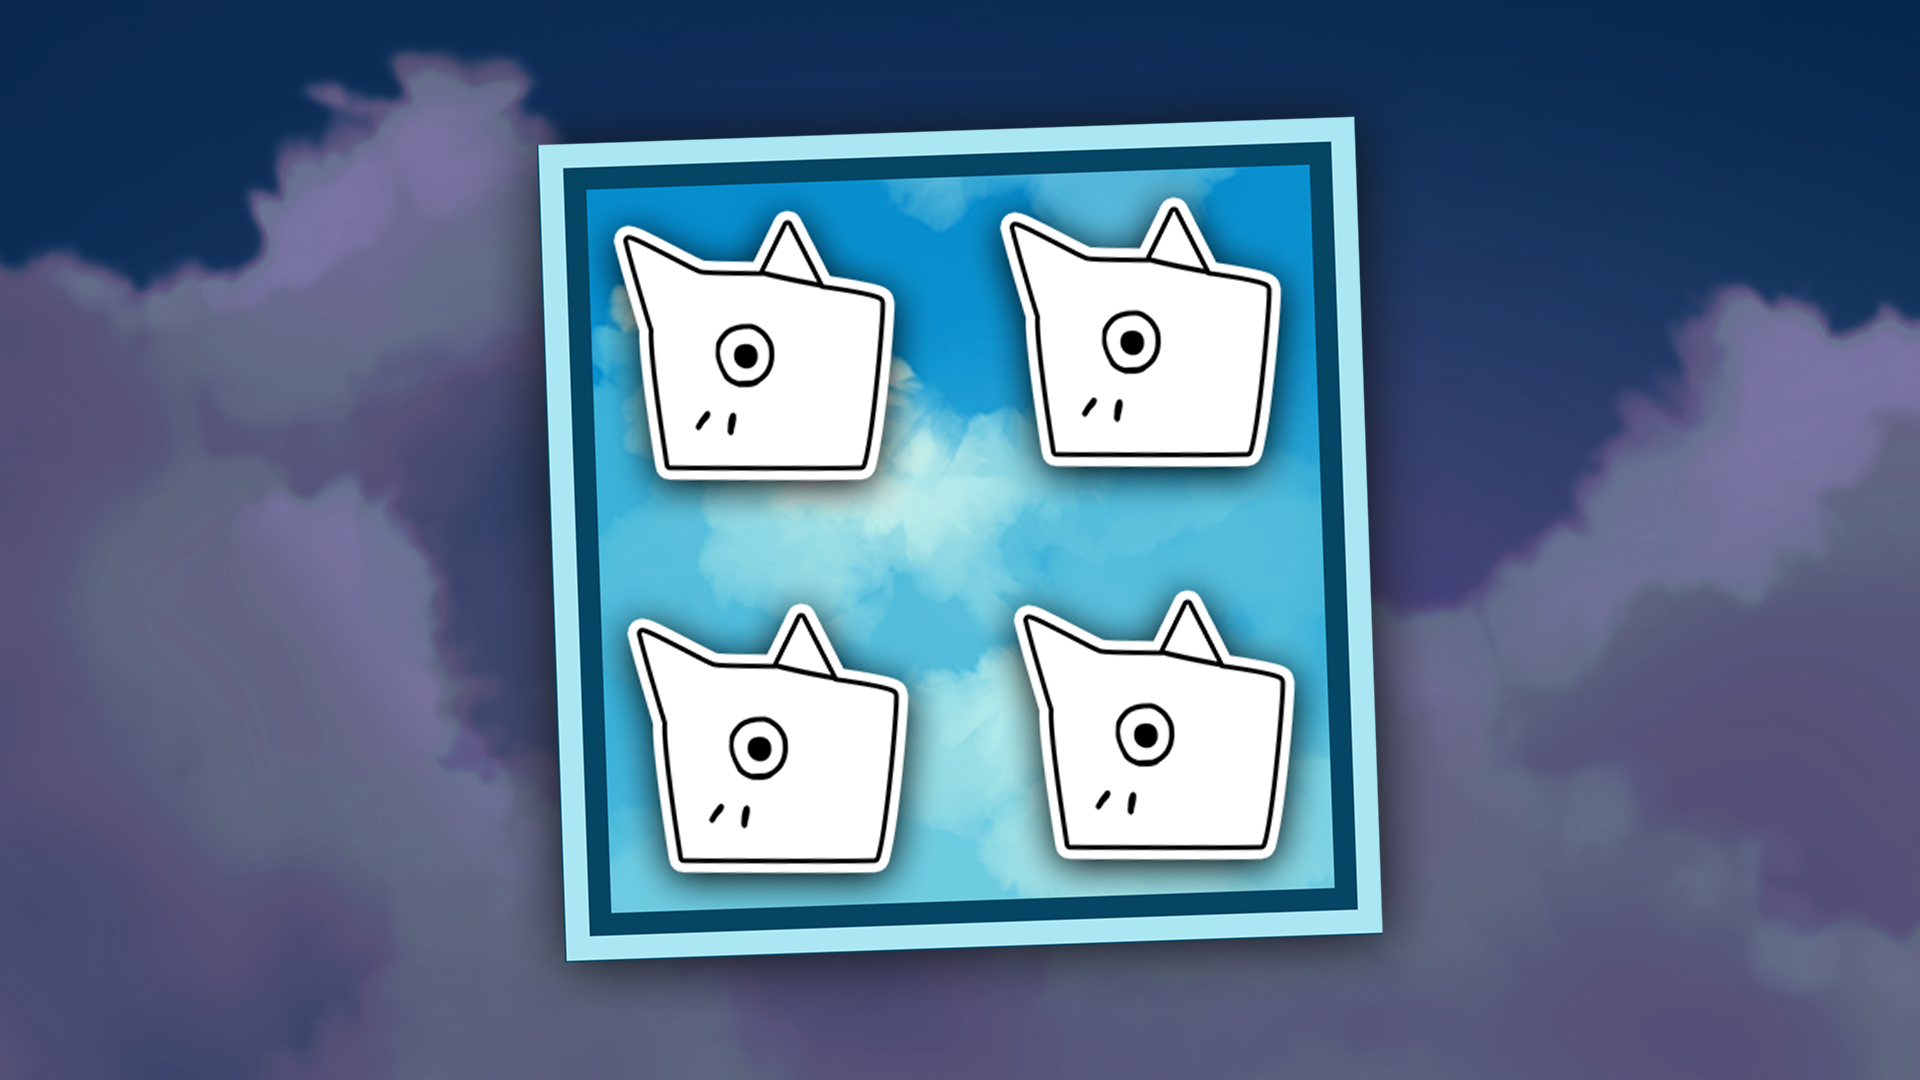 Icon for Fully Equipped